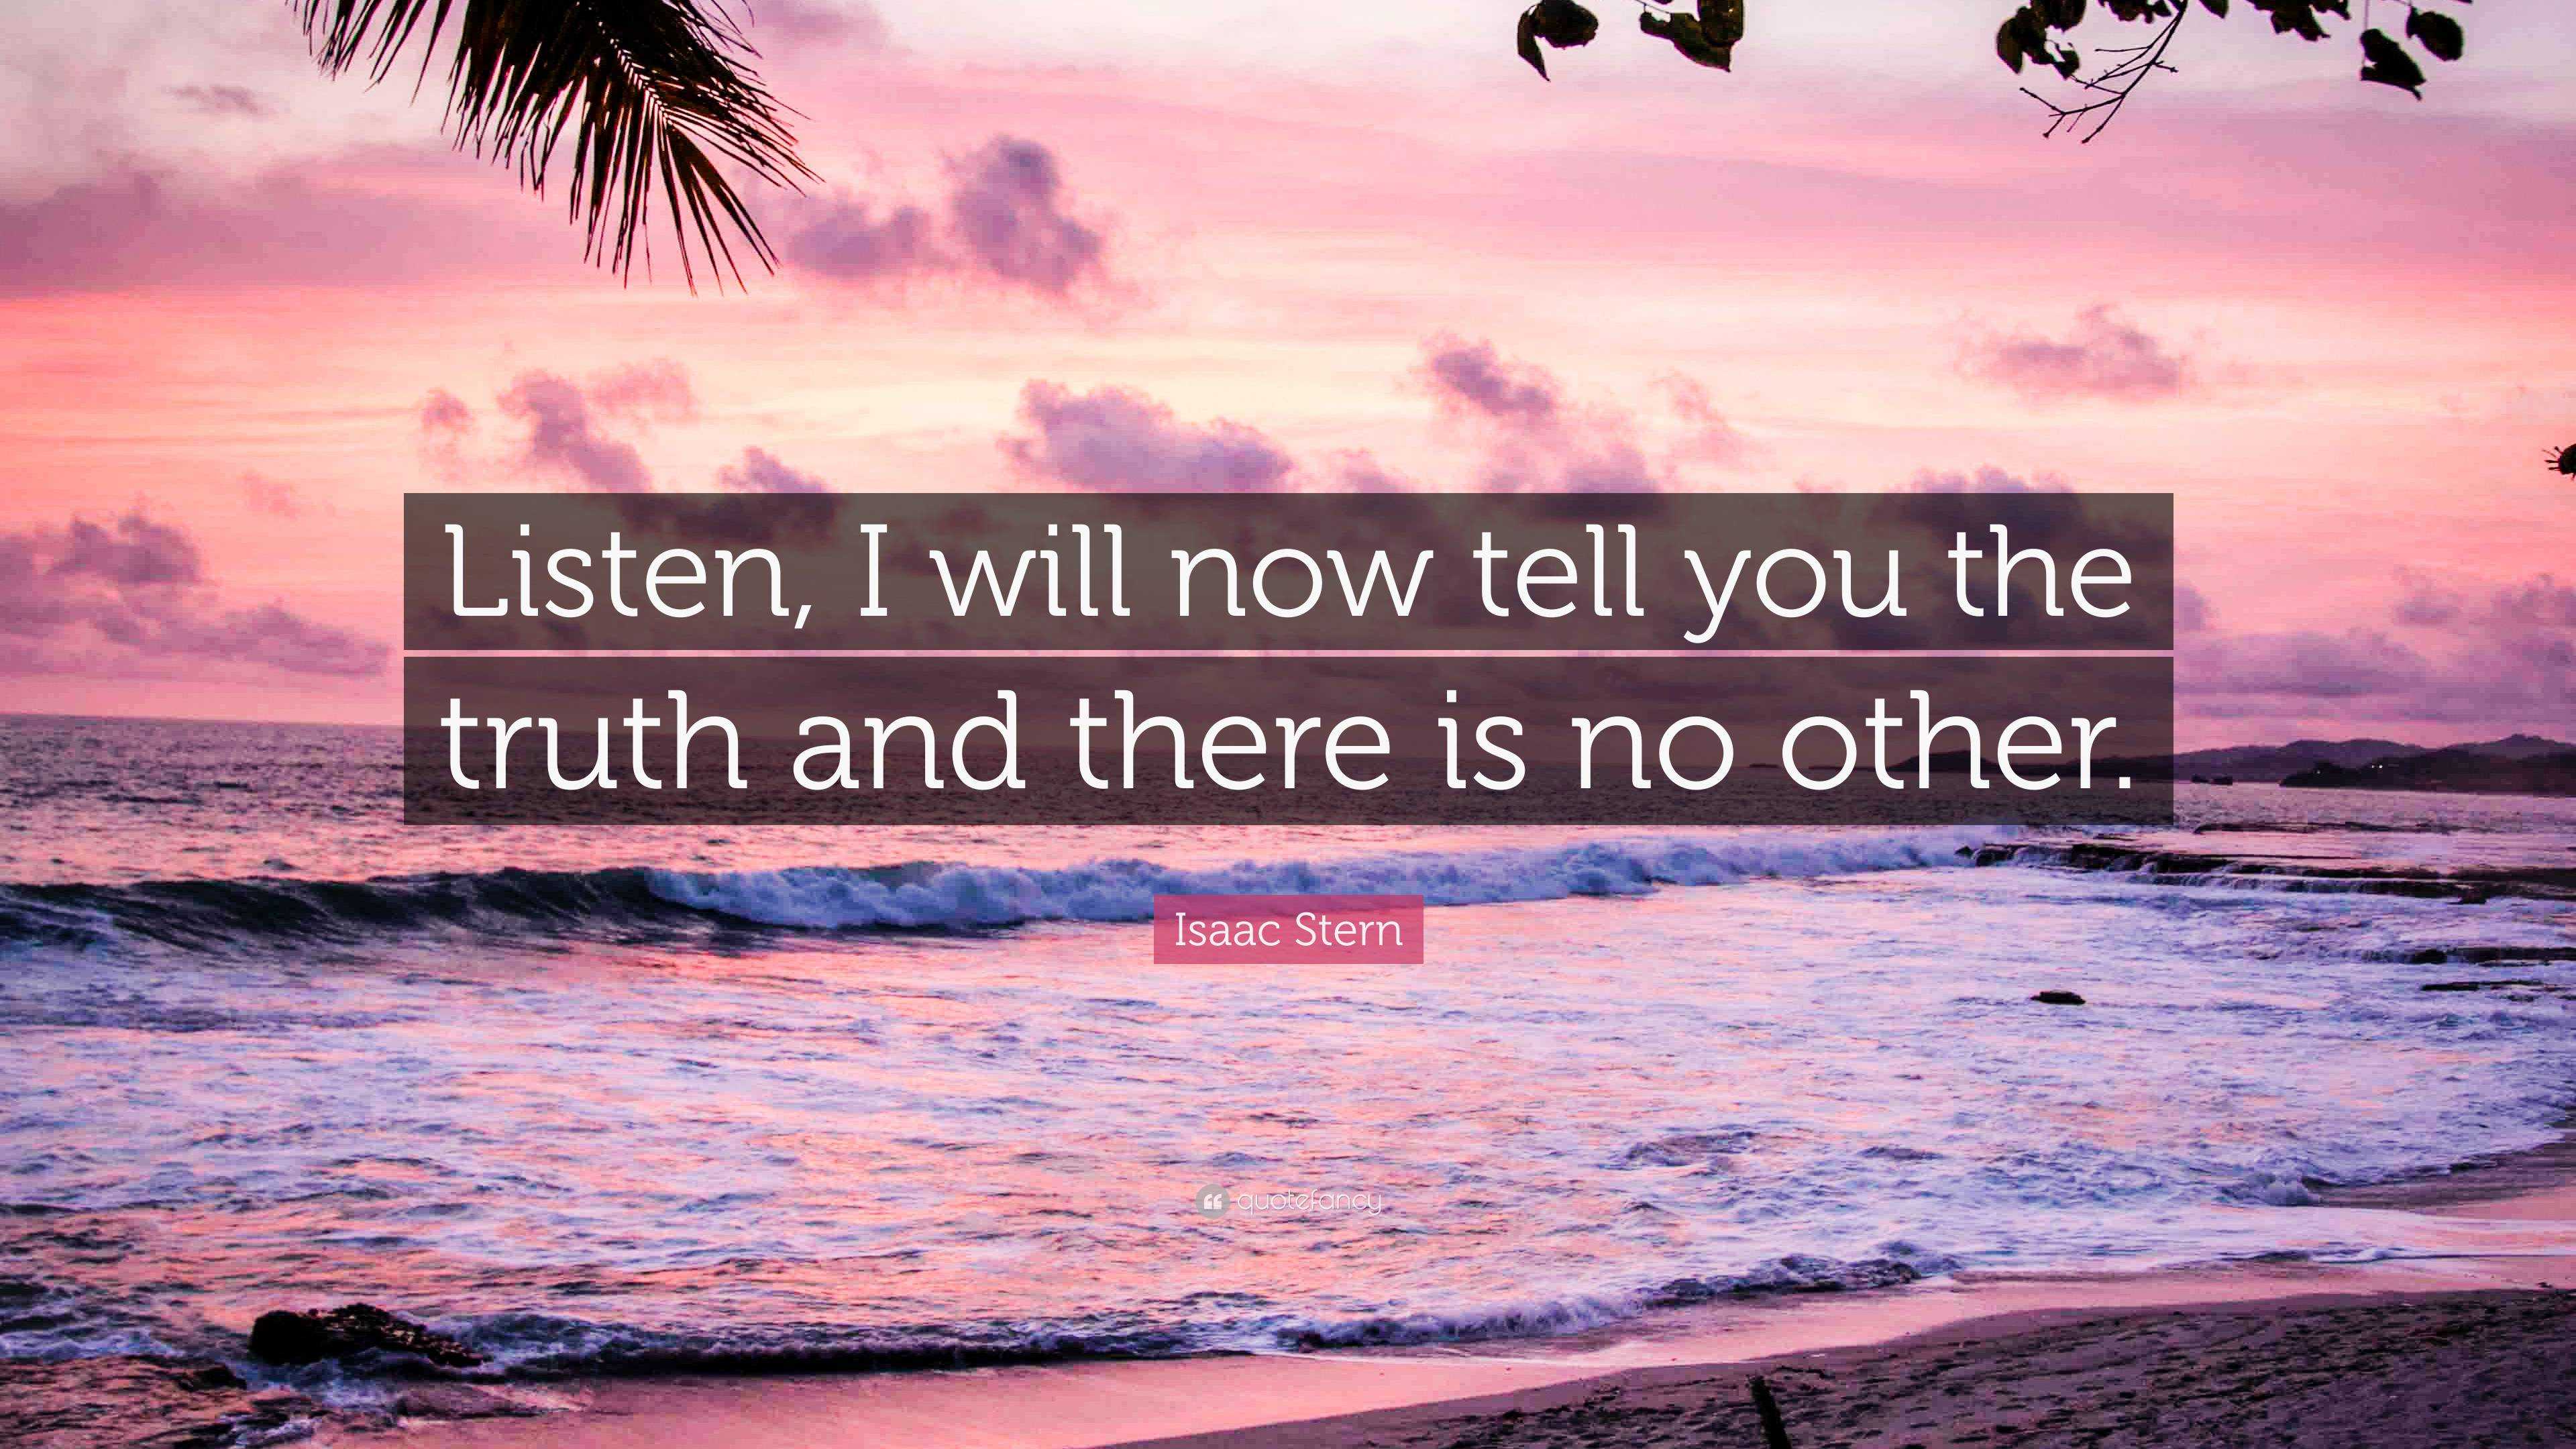 Isaac Stern Quote: “Listen, I will now tell you the truth and there is ...